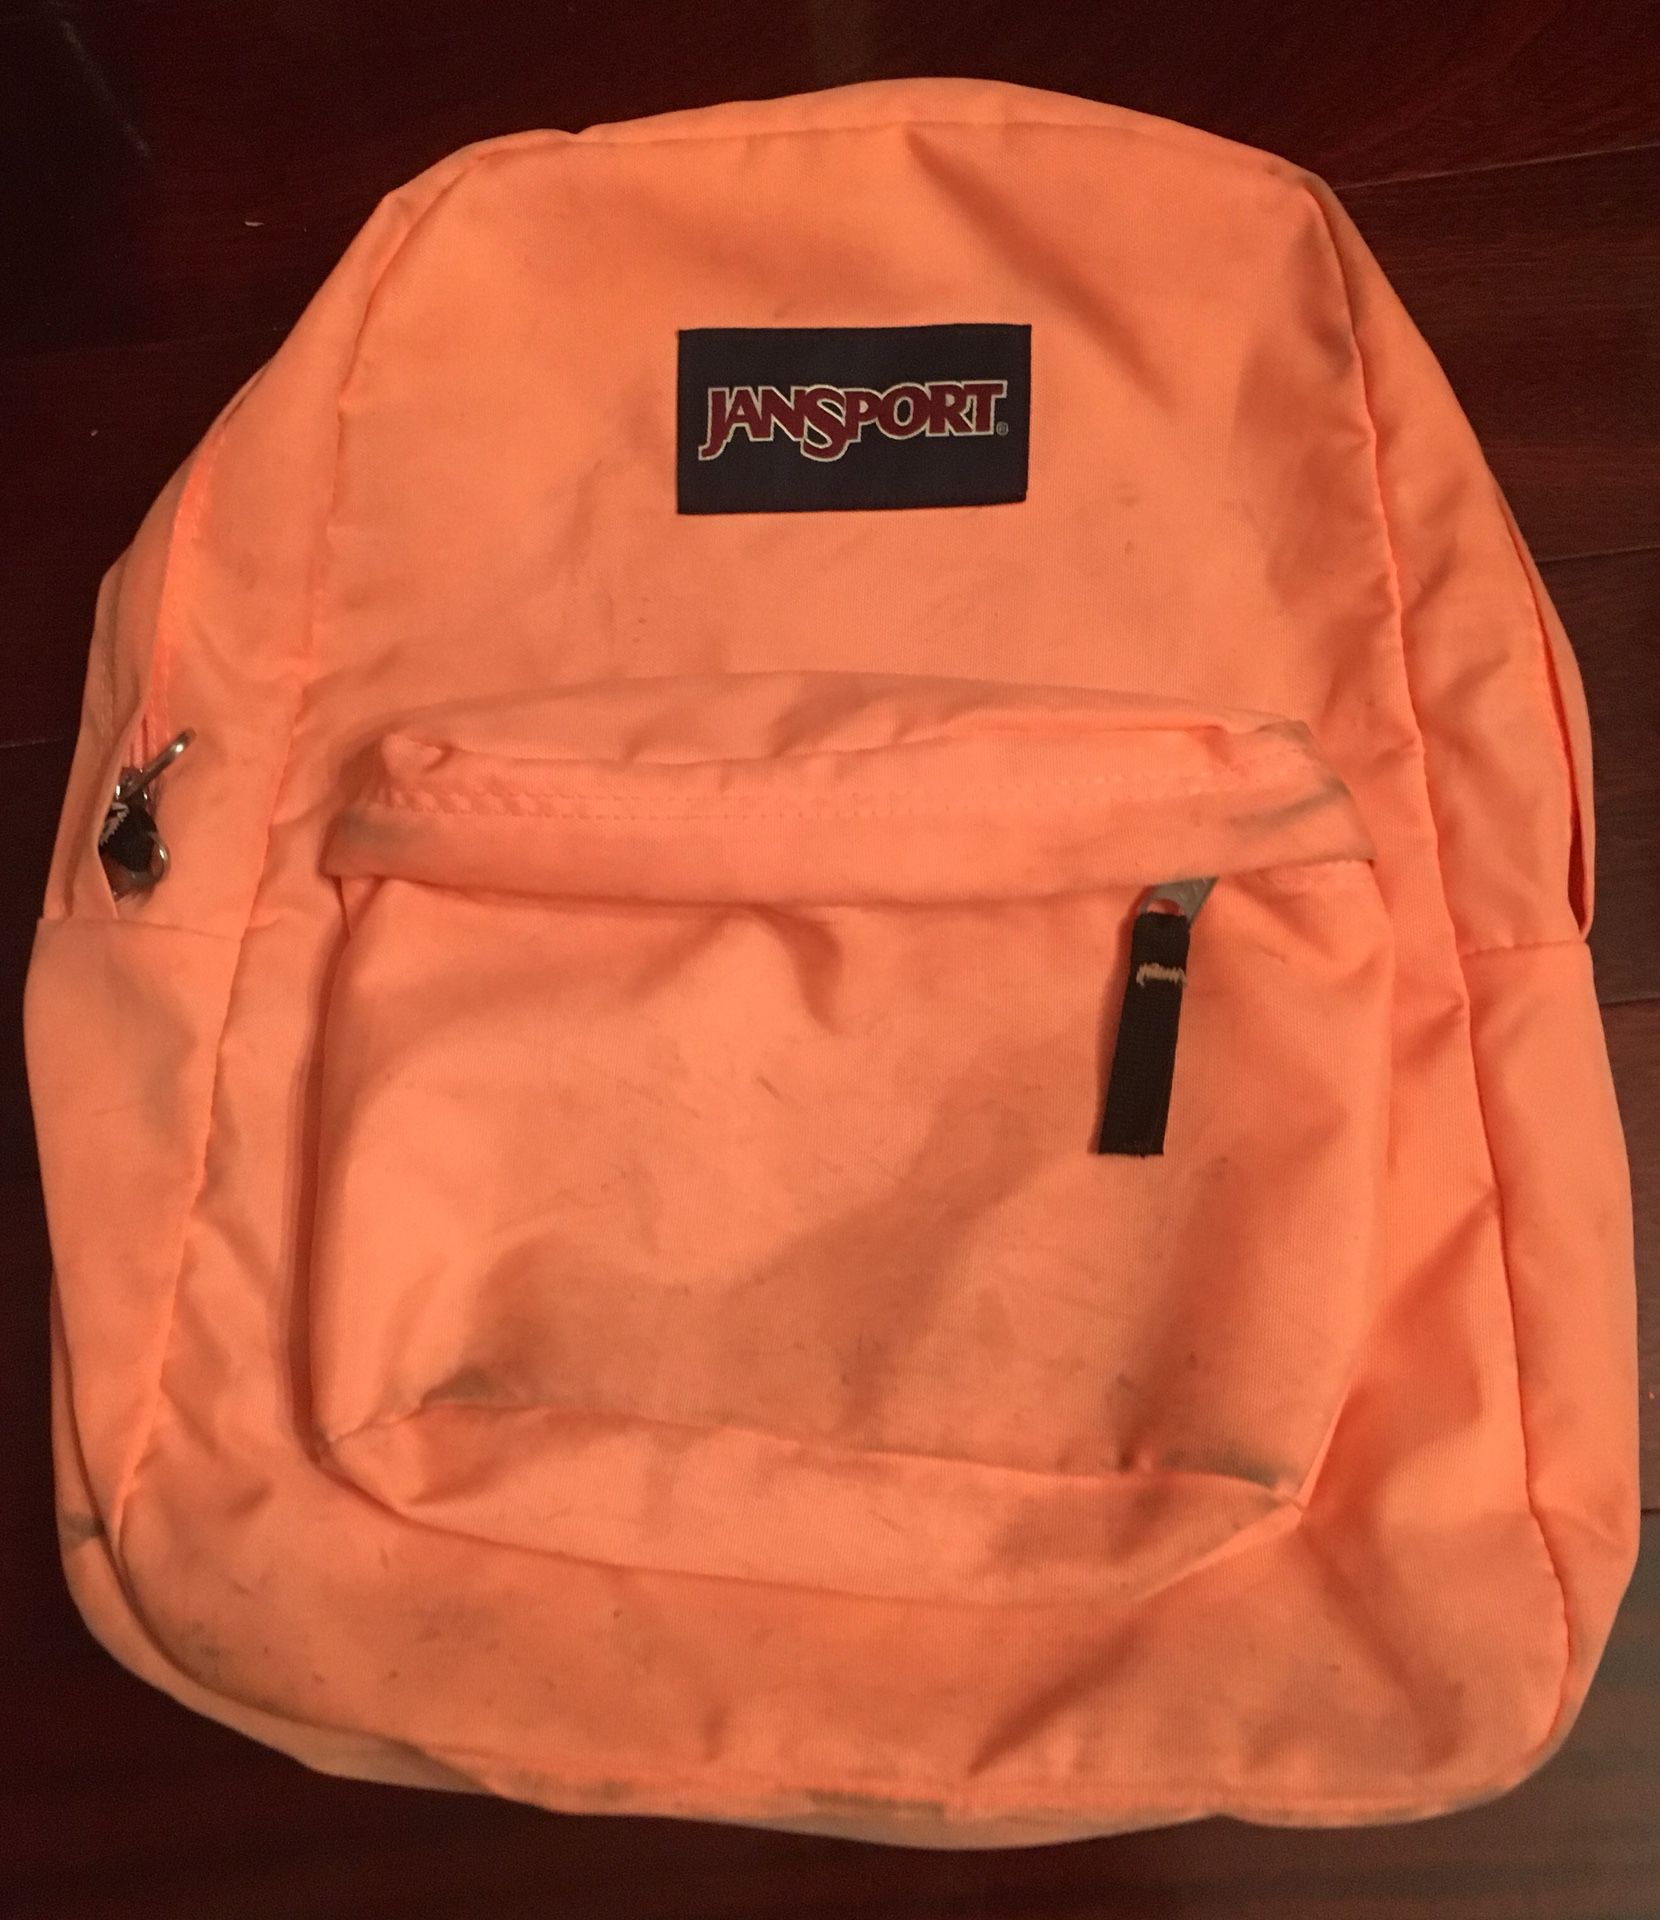 Jansport Peach Bookbag / Backpack with Zippered Storage Area